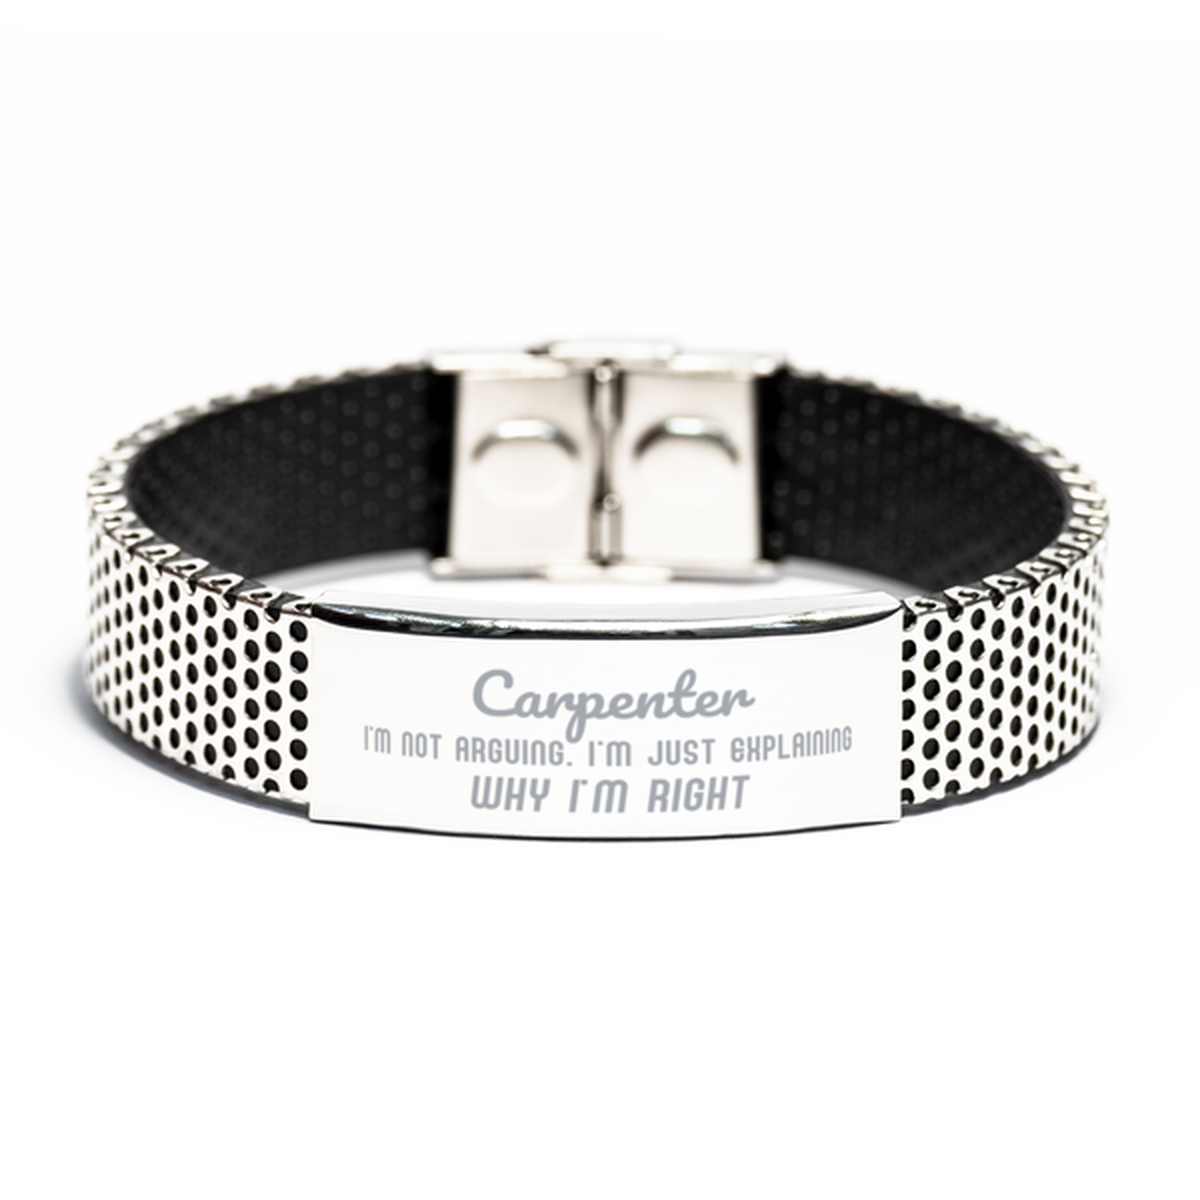 Carpenter I'm not Arguing. I'm Just Explaining Why I'm RIGHT Stainless Steel Bracelet, Funny Saying Quote Carpenter Gifts For Carpenter Graduation Birthday Christmas Gifts for Men Women Coworker